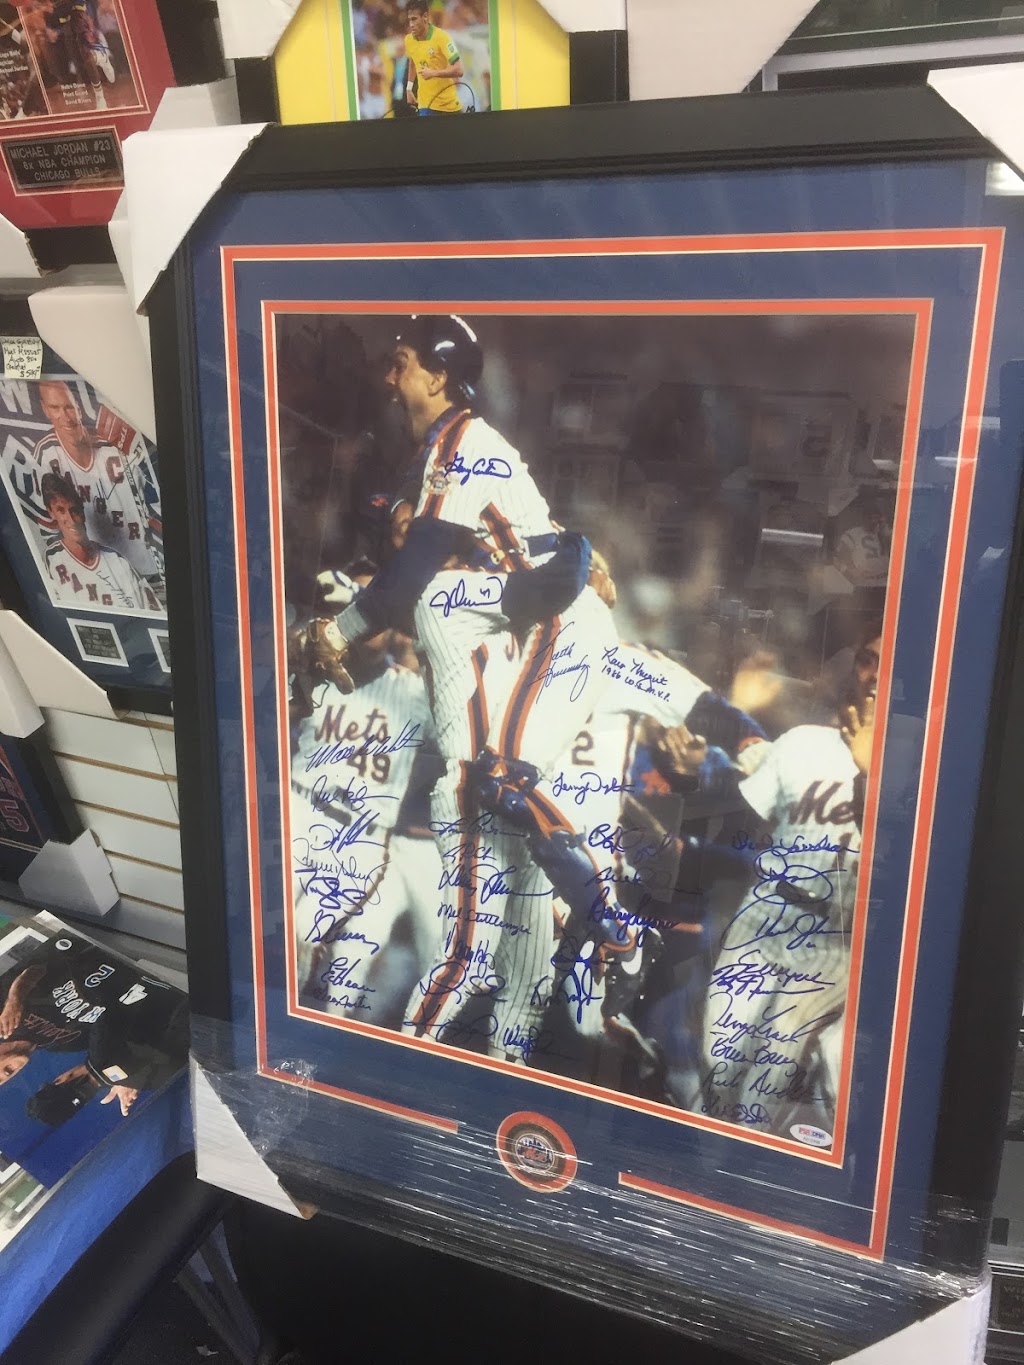 Living Legends Memorabilia and Collectibles, Inc. | 124 S Long Beach Rd, Rockville Centre, NY 11570, USA | Phone: (516) 826-4000